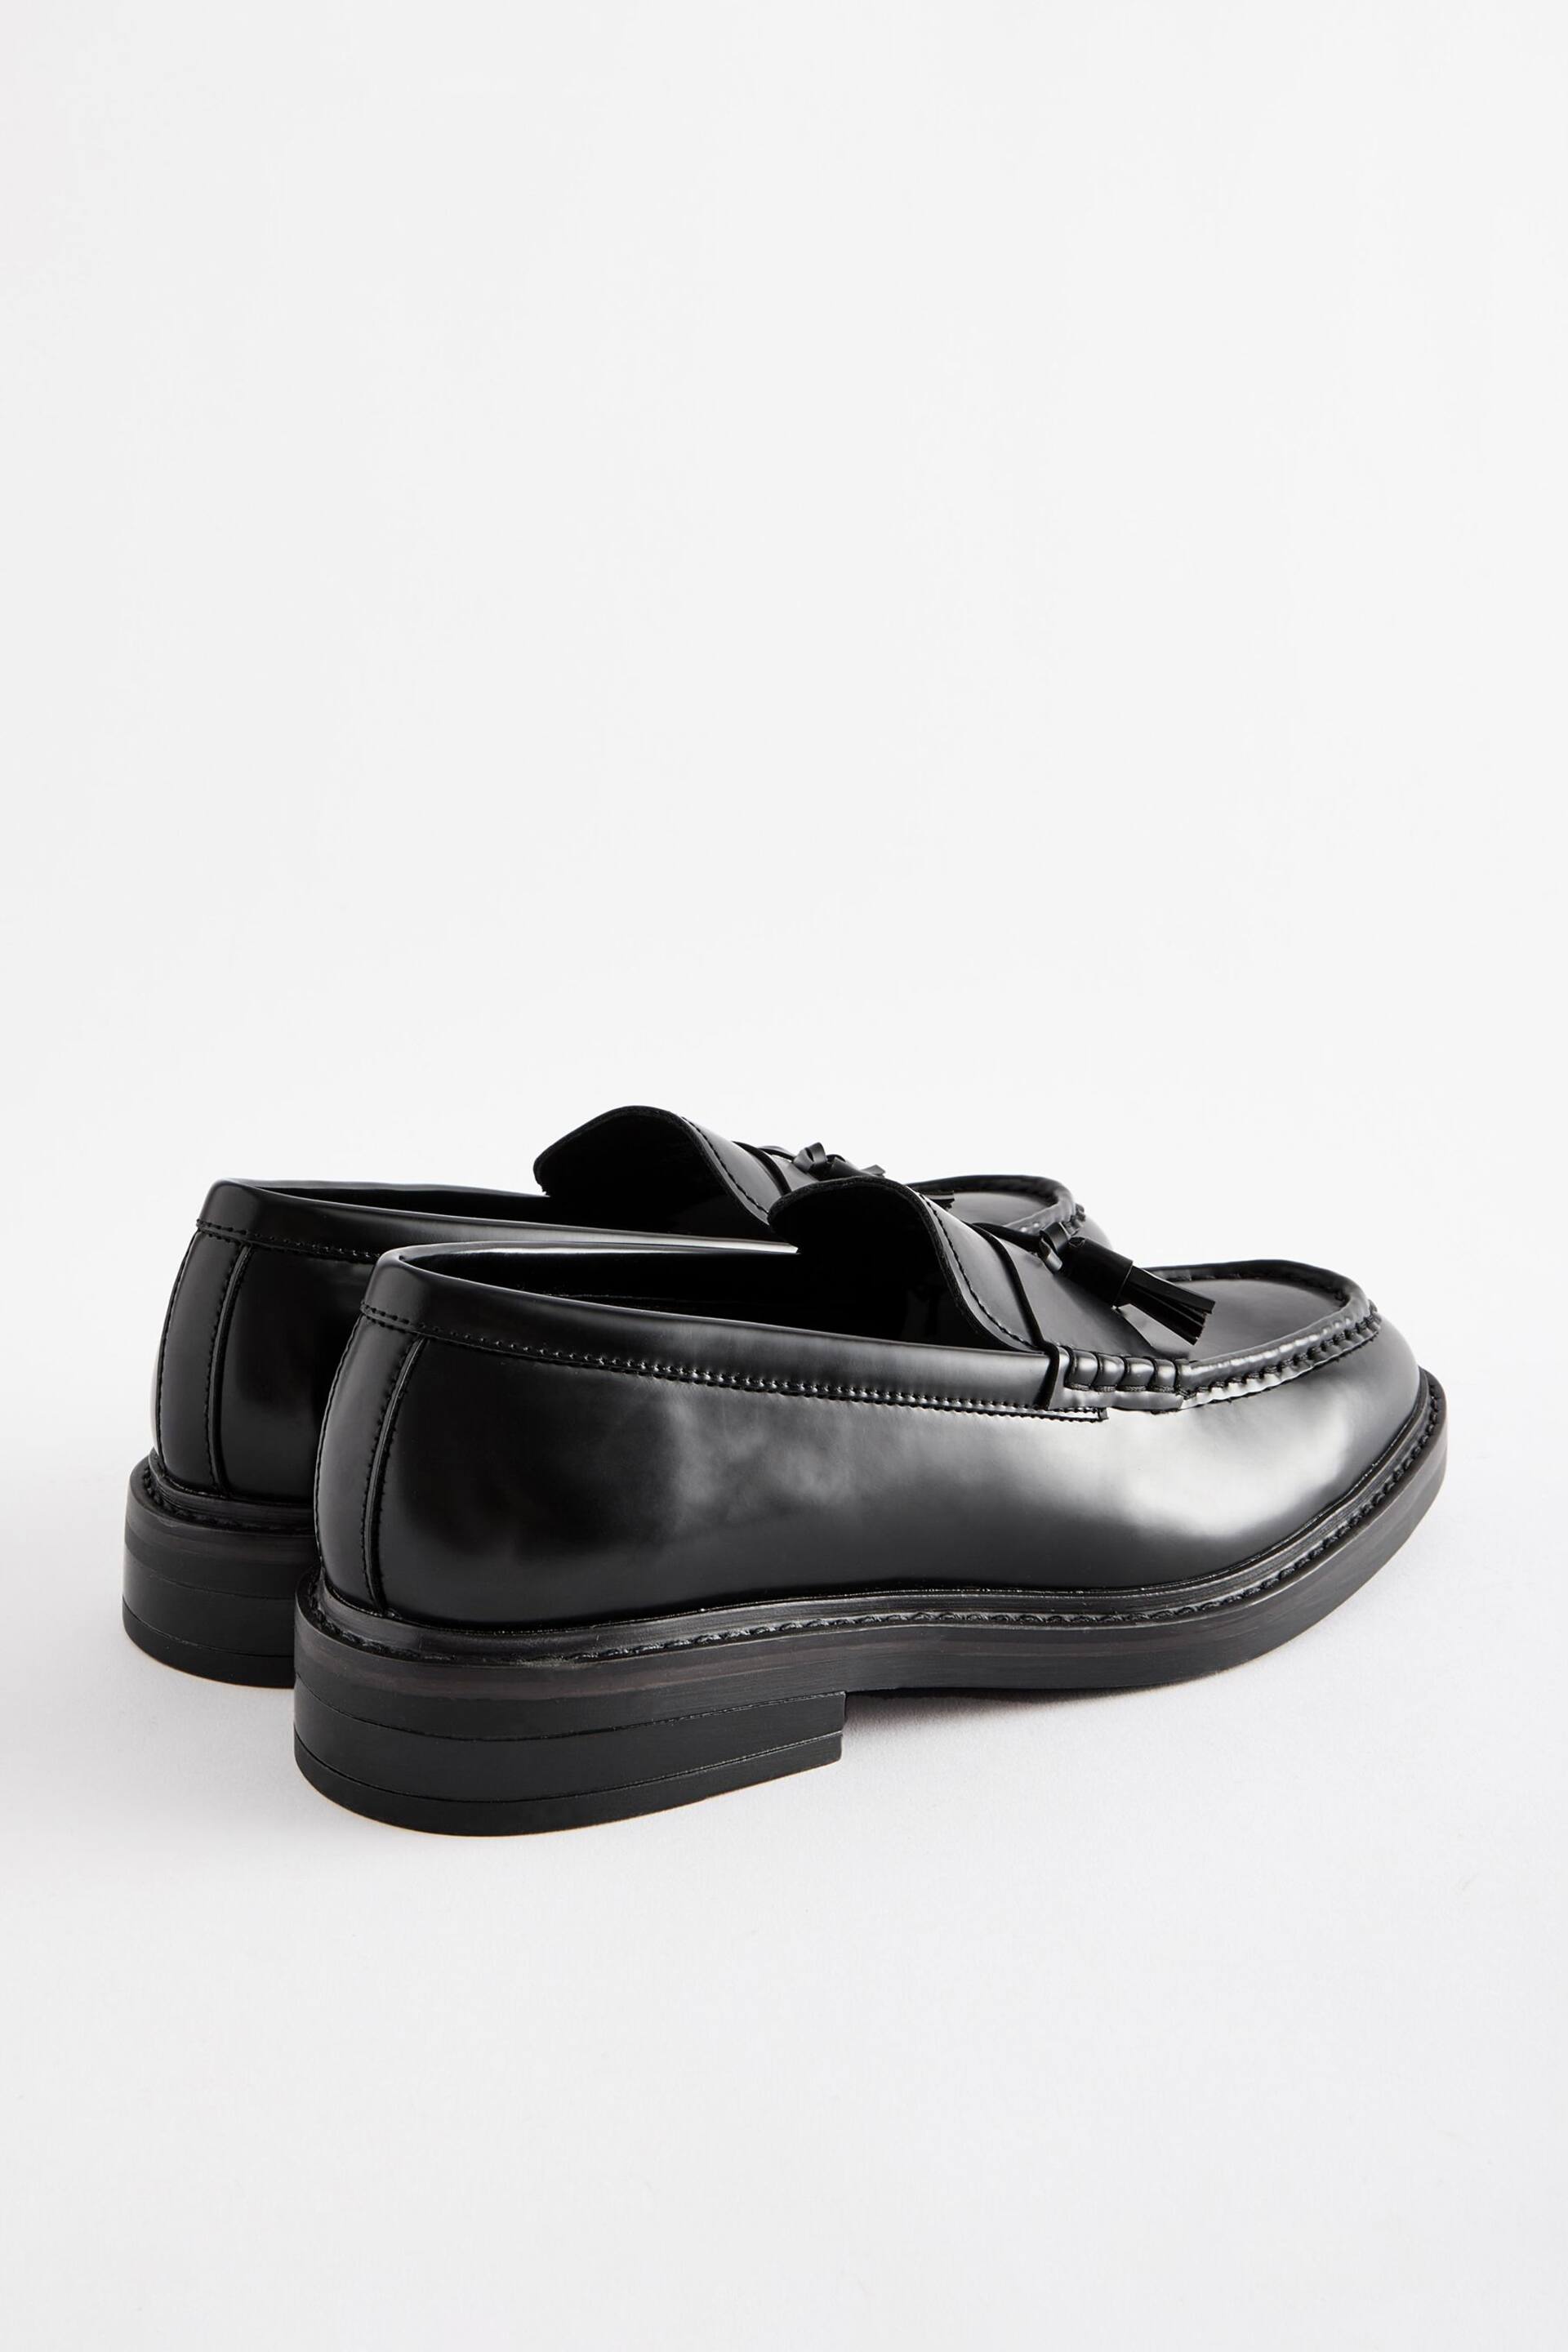 Black Chunky Tassel Loafers - Image 2 of 6